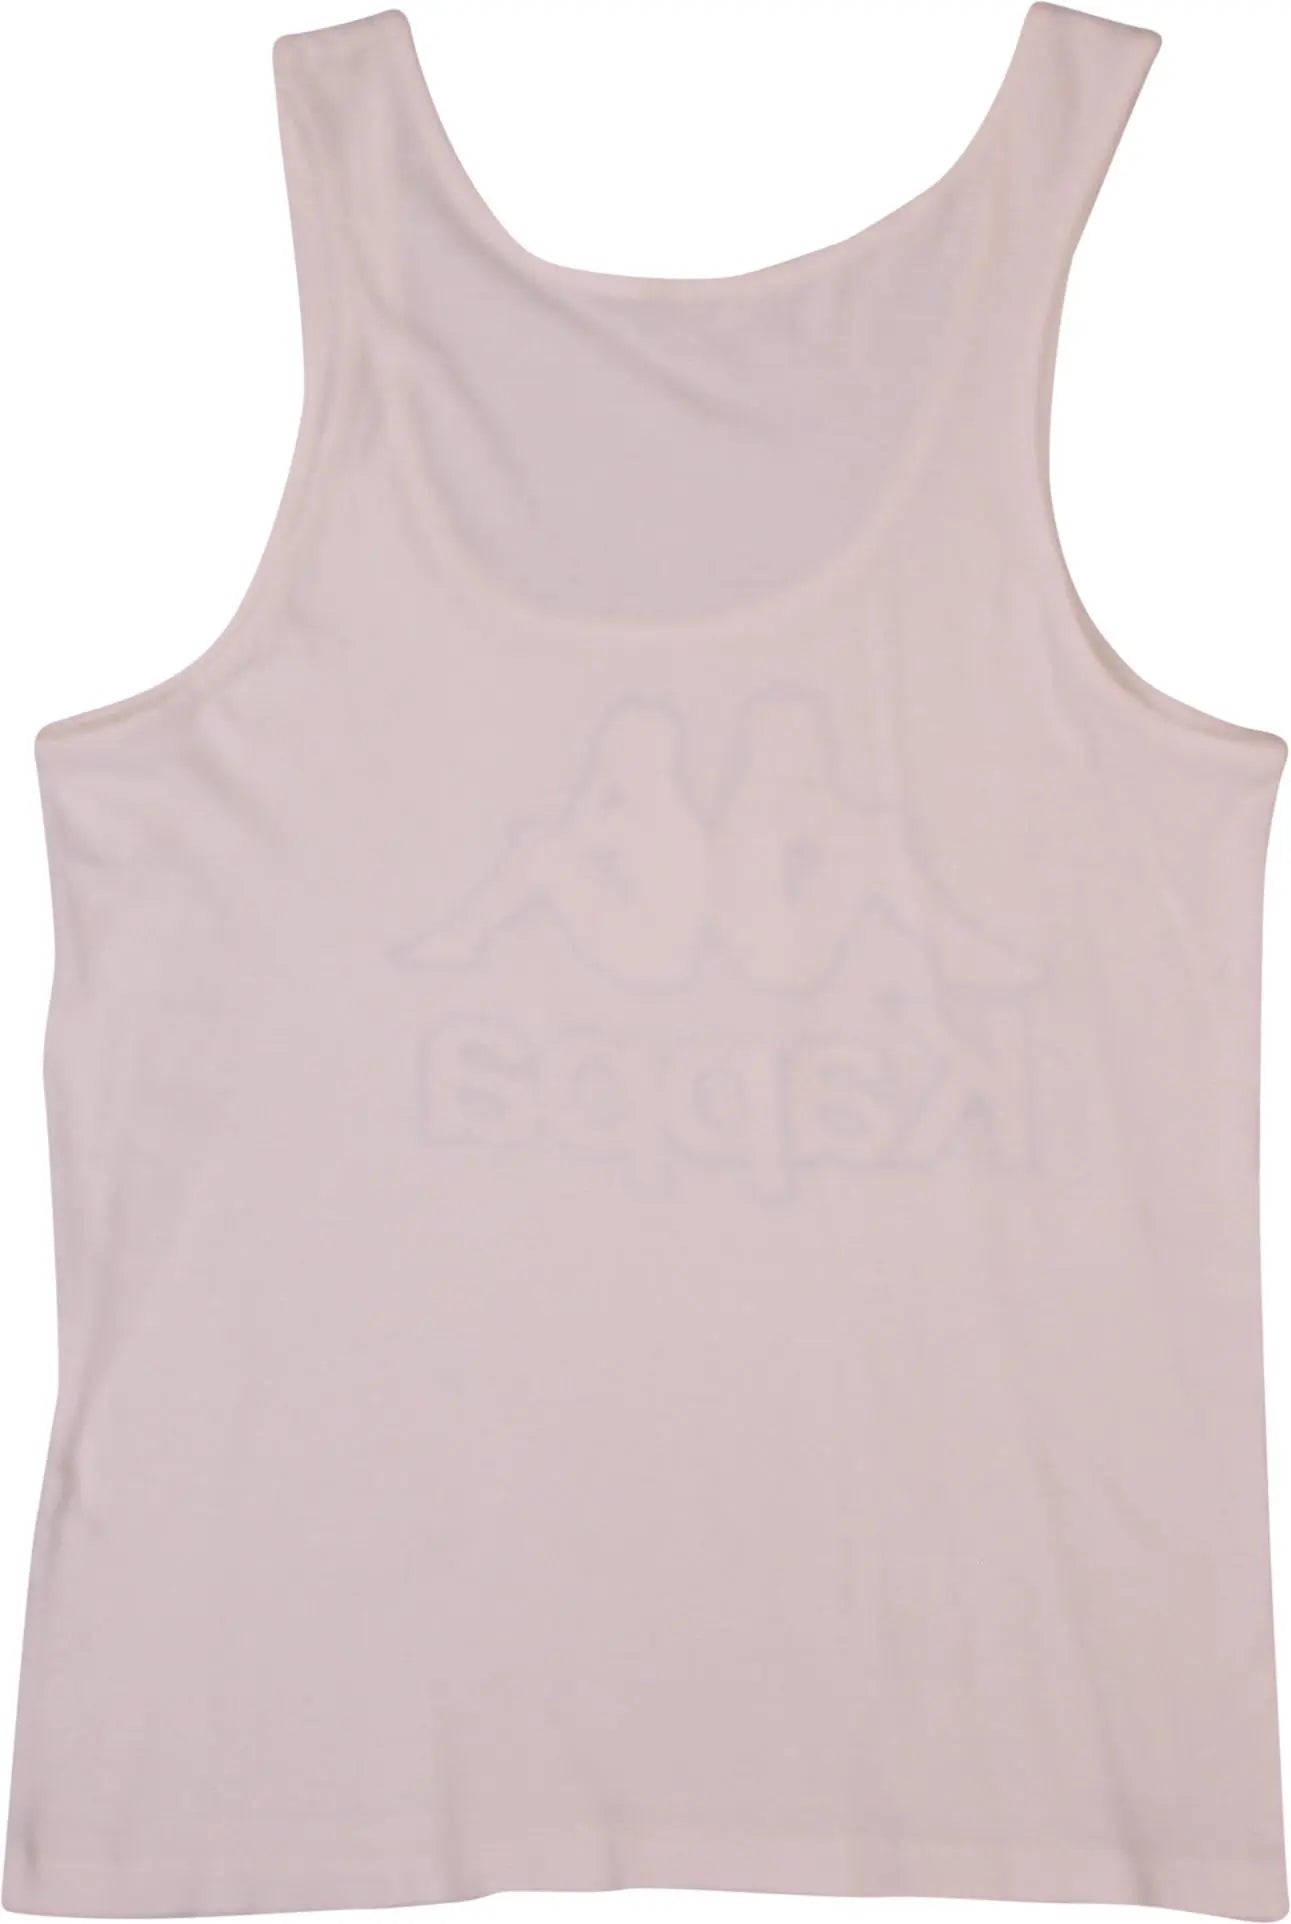 Kappa - White Tank Top by Kappa- ThriftTale.com - Vintage and second handclothing